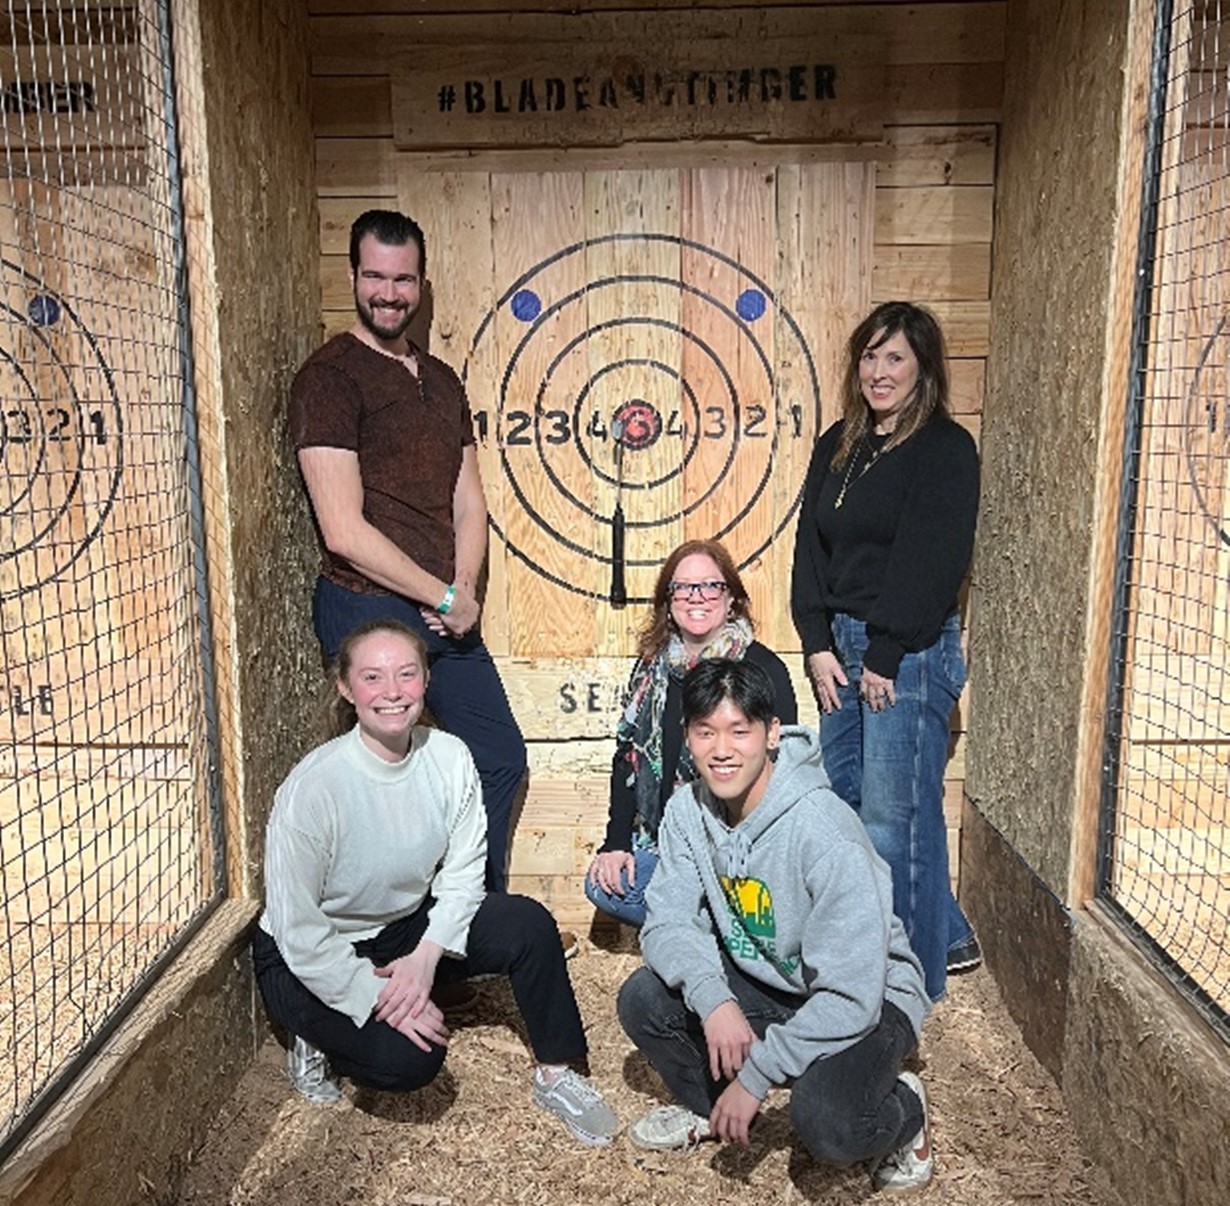 Employees from the Seattle office doing axe throwing as a team building event!